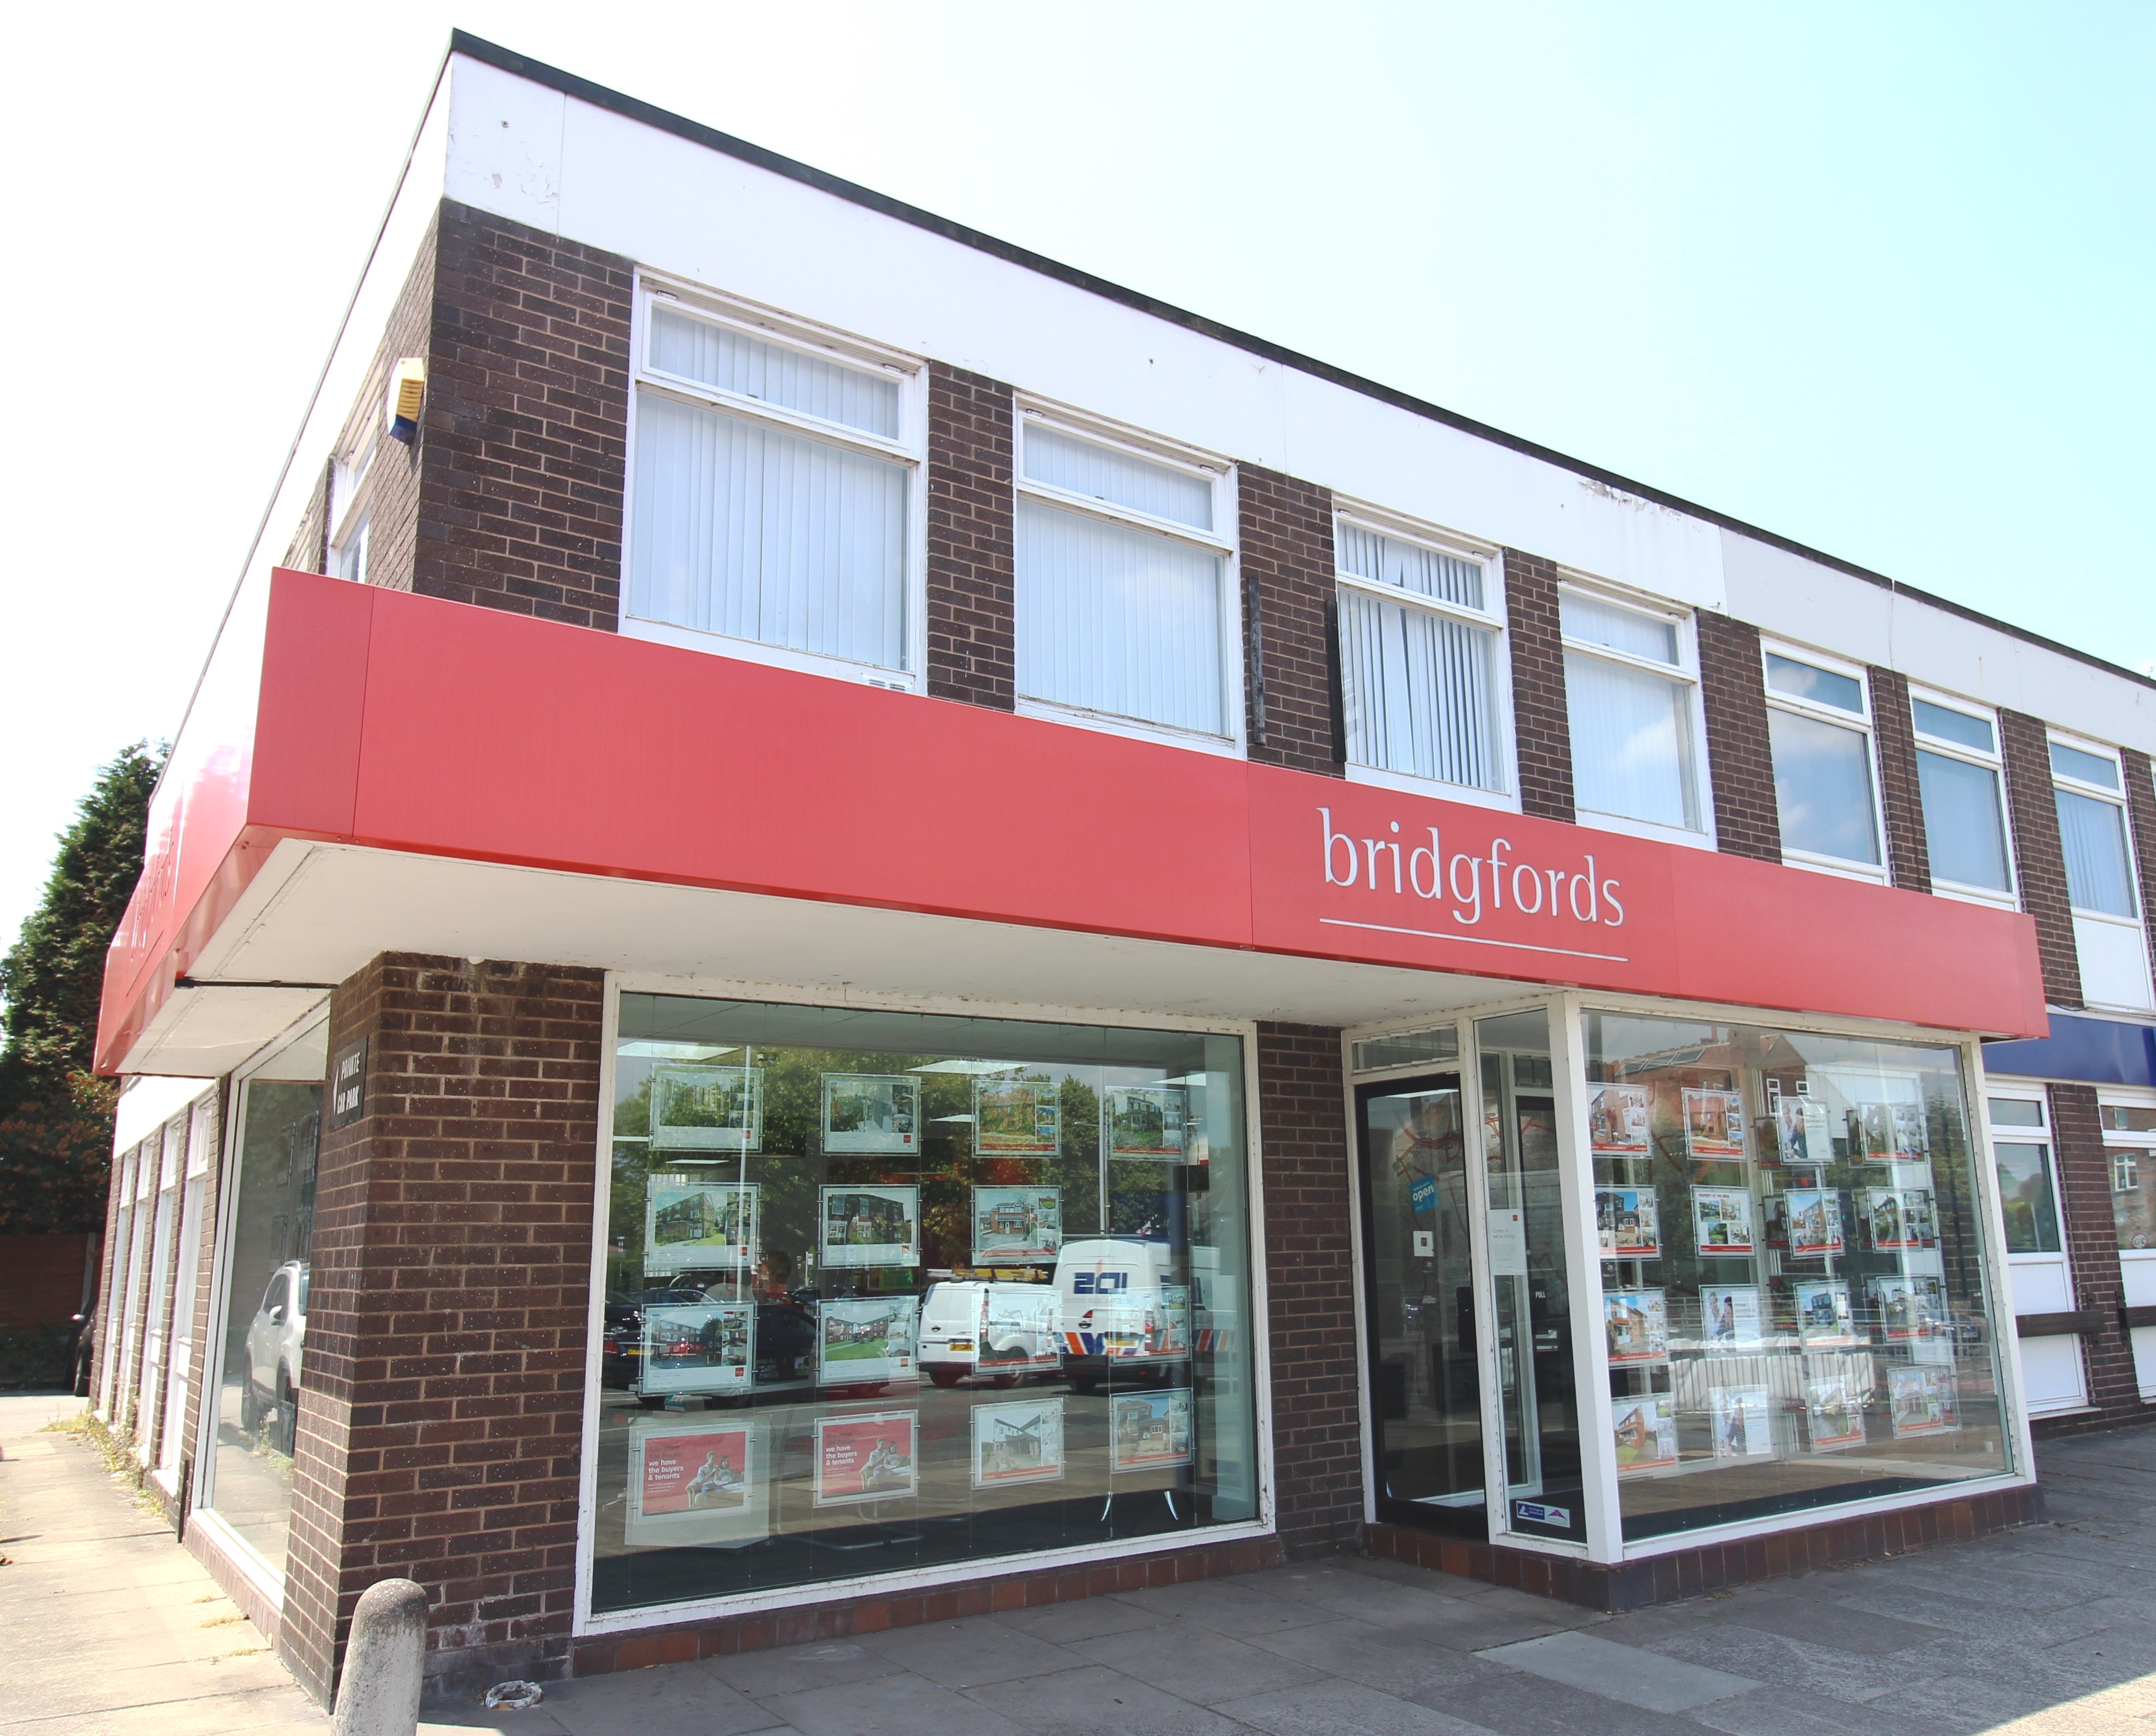 Bridgfords Sales and Letting Agents Cheadle Hulme Cheadle 01614 010574